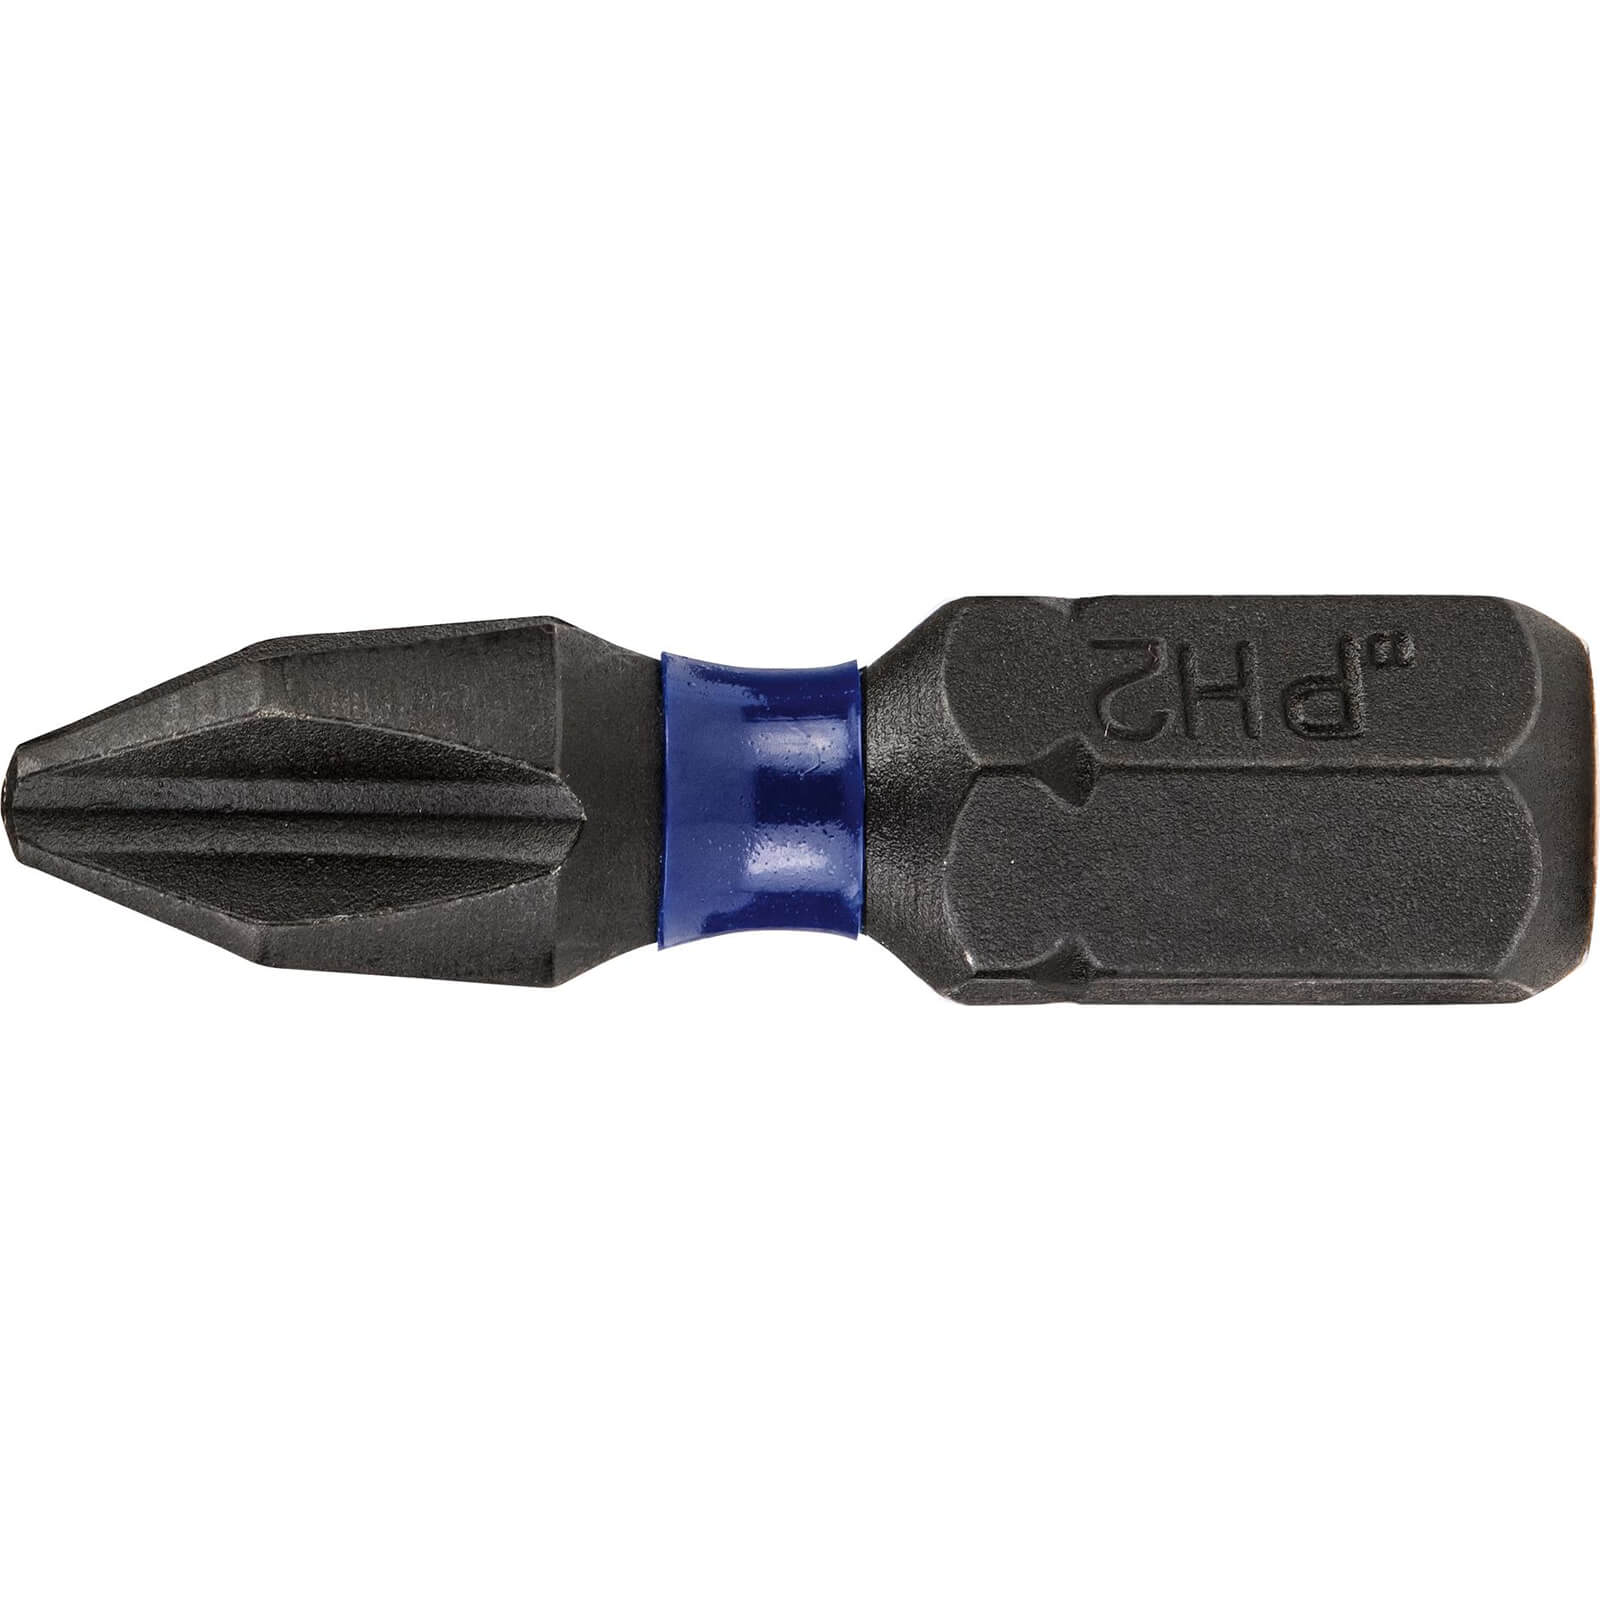 Image of Irwin Impact Pro Performance Phillips Screwdriver Bits PH2 25mm Pack of 2